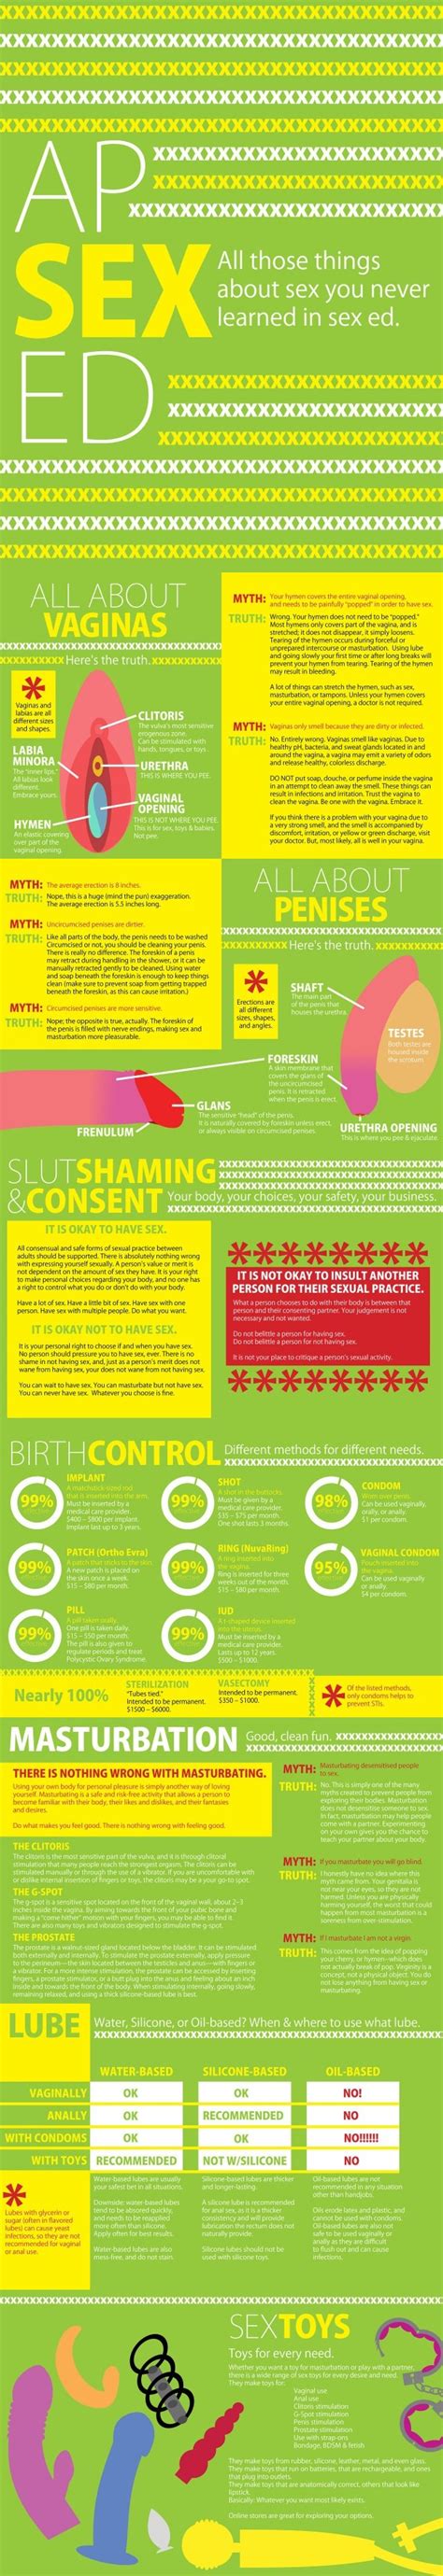 topics you never learnt in sex education class [infographic]